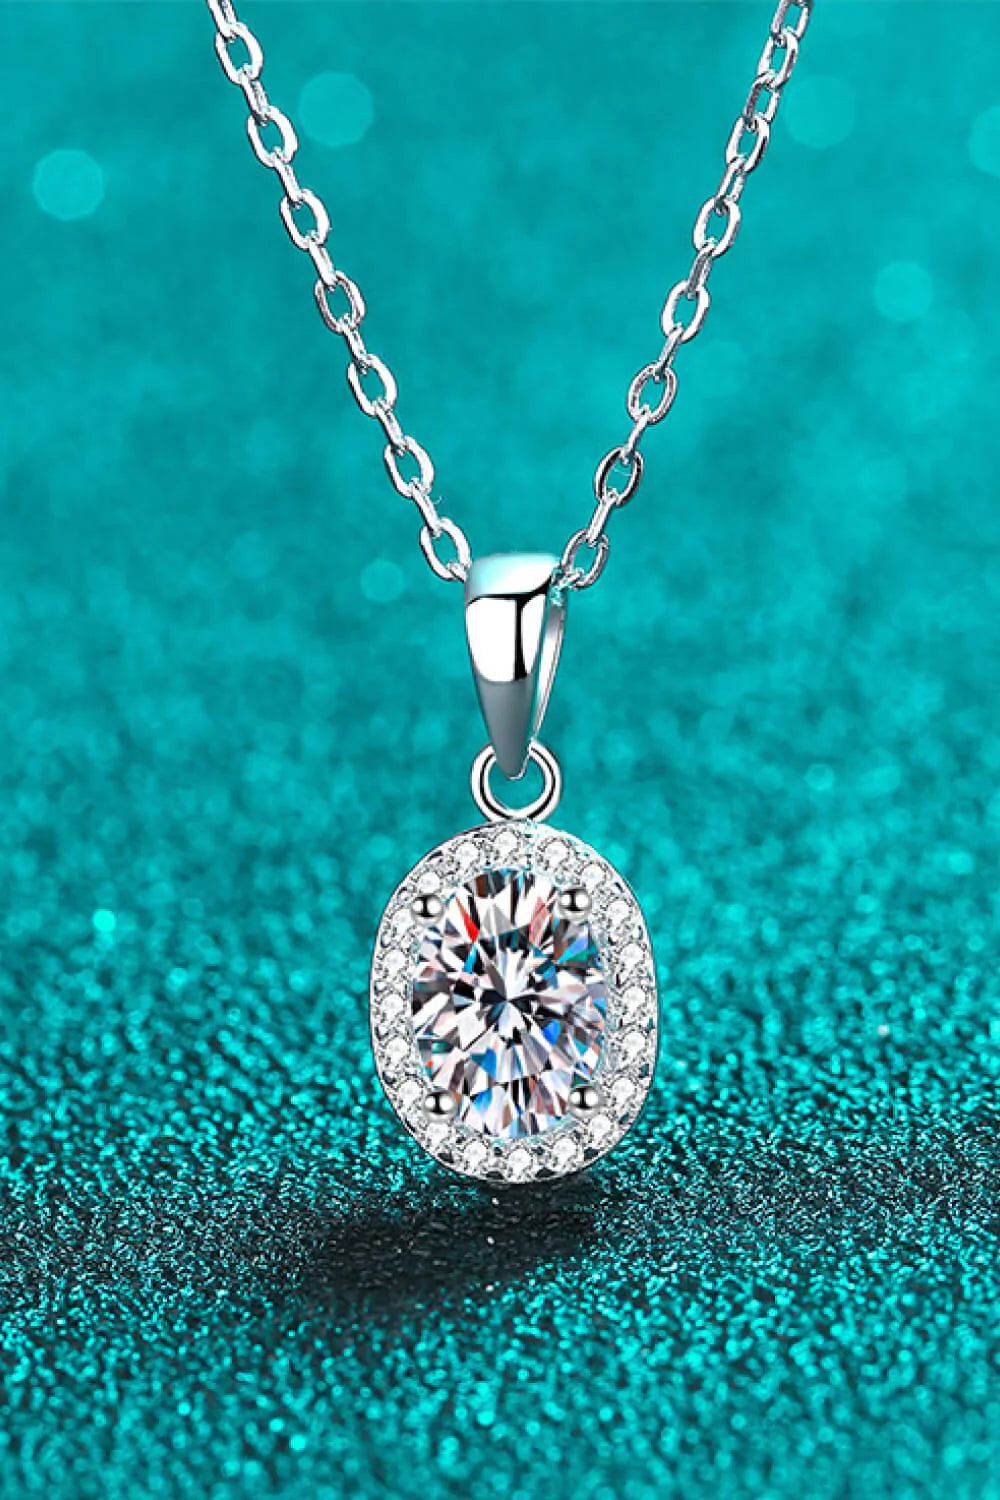 Be The One 1 Carat Moissanite Pendant Necklace - Necklaces - FITGGINS